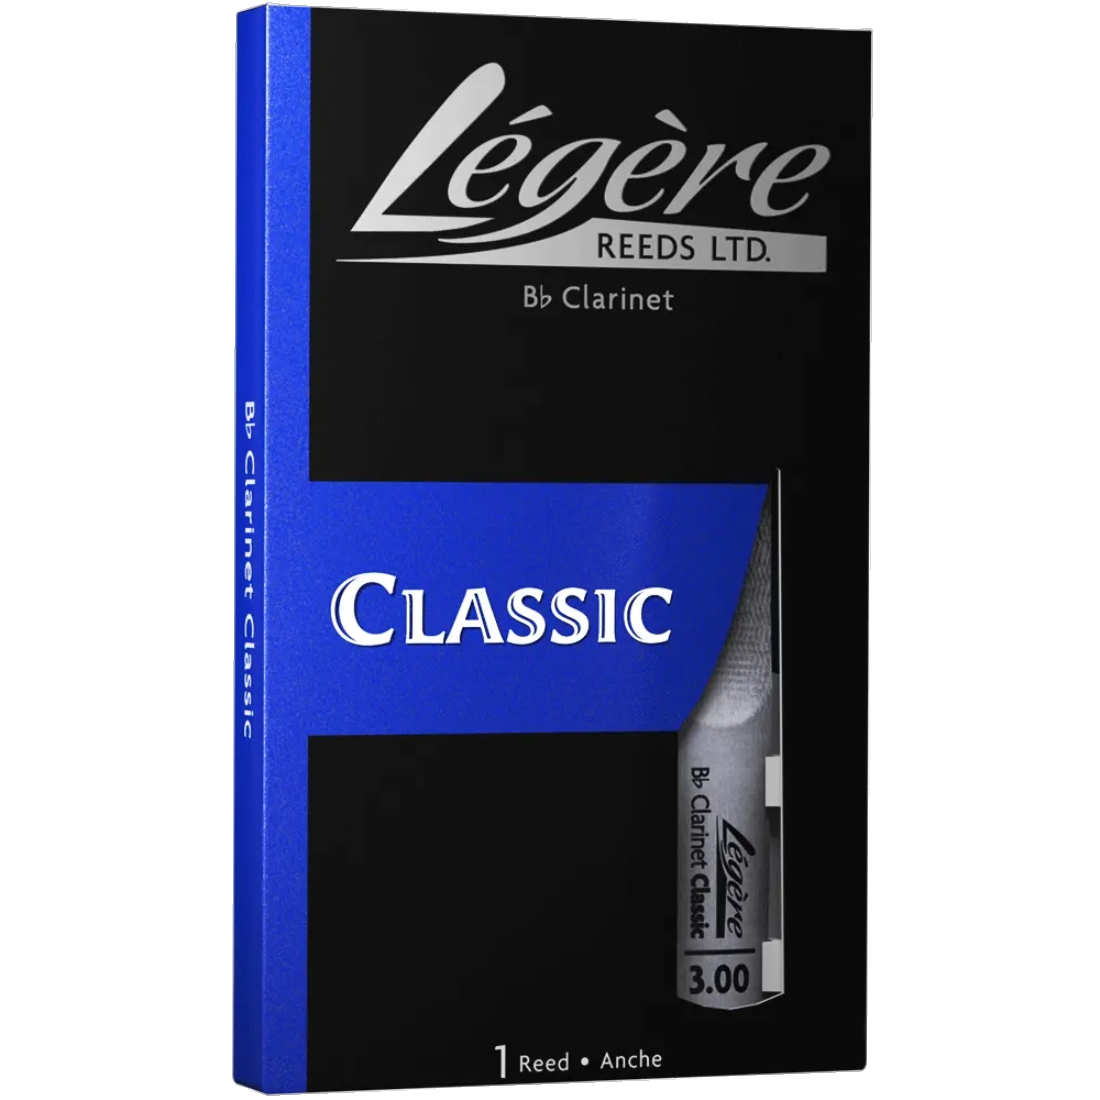 Black and blue box of classic Legere classic clarinet reeds